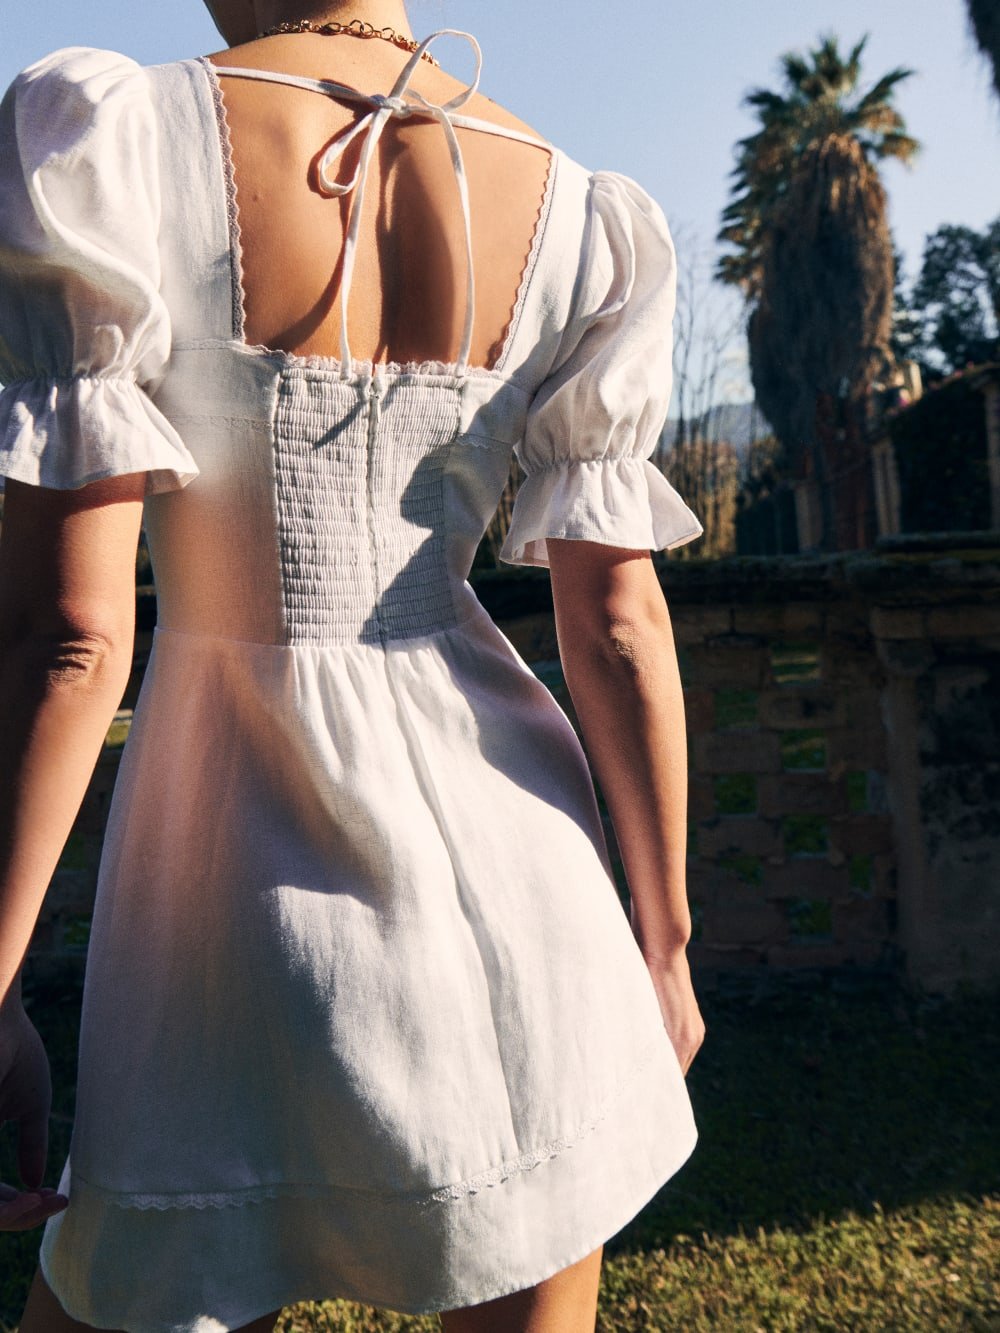 This Reformation dress uses shirring to "cheat" on fit